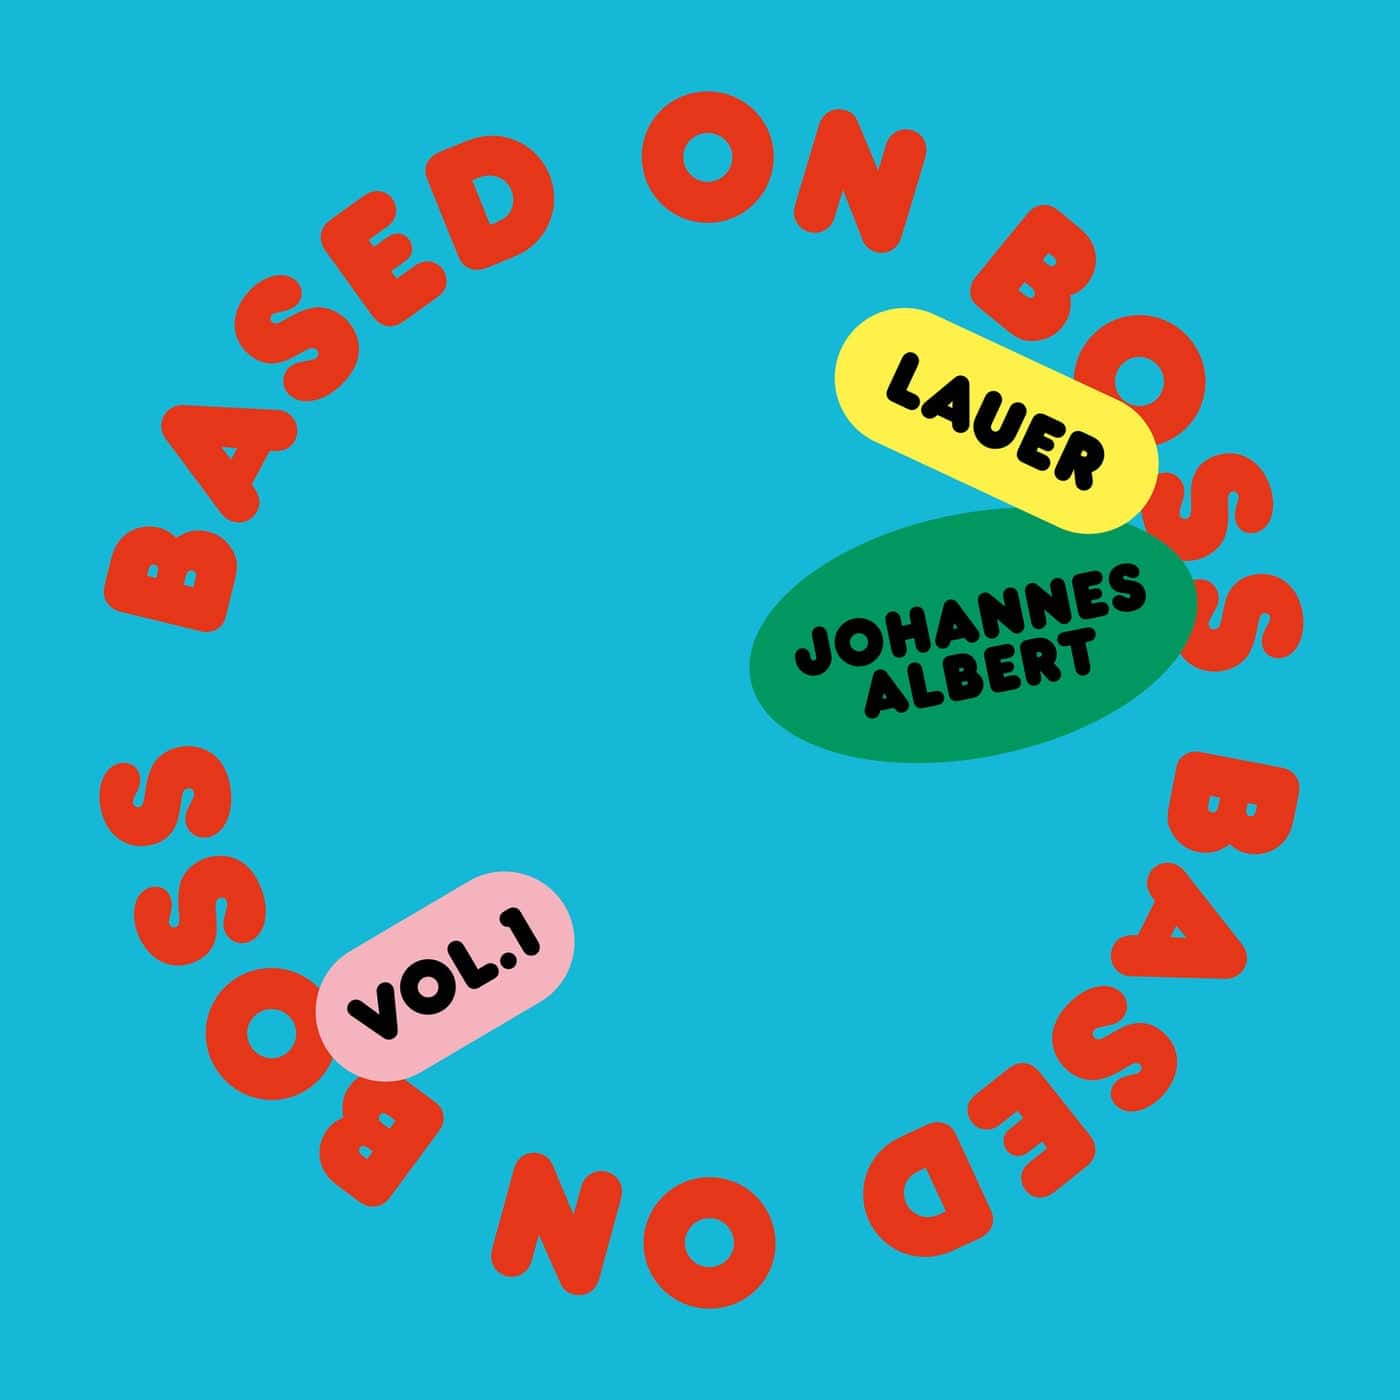 Download Lauer, Johannes Albert - Based On Boss Vol. I on Electrobuzz